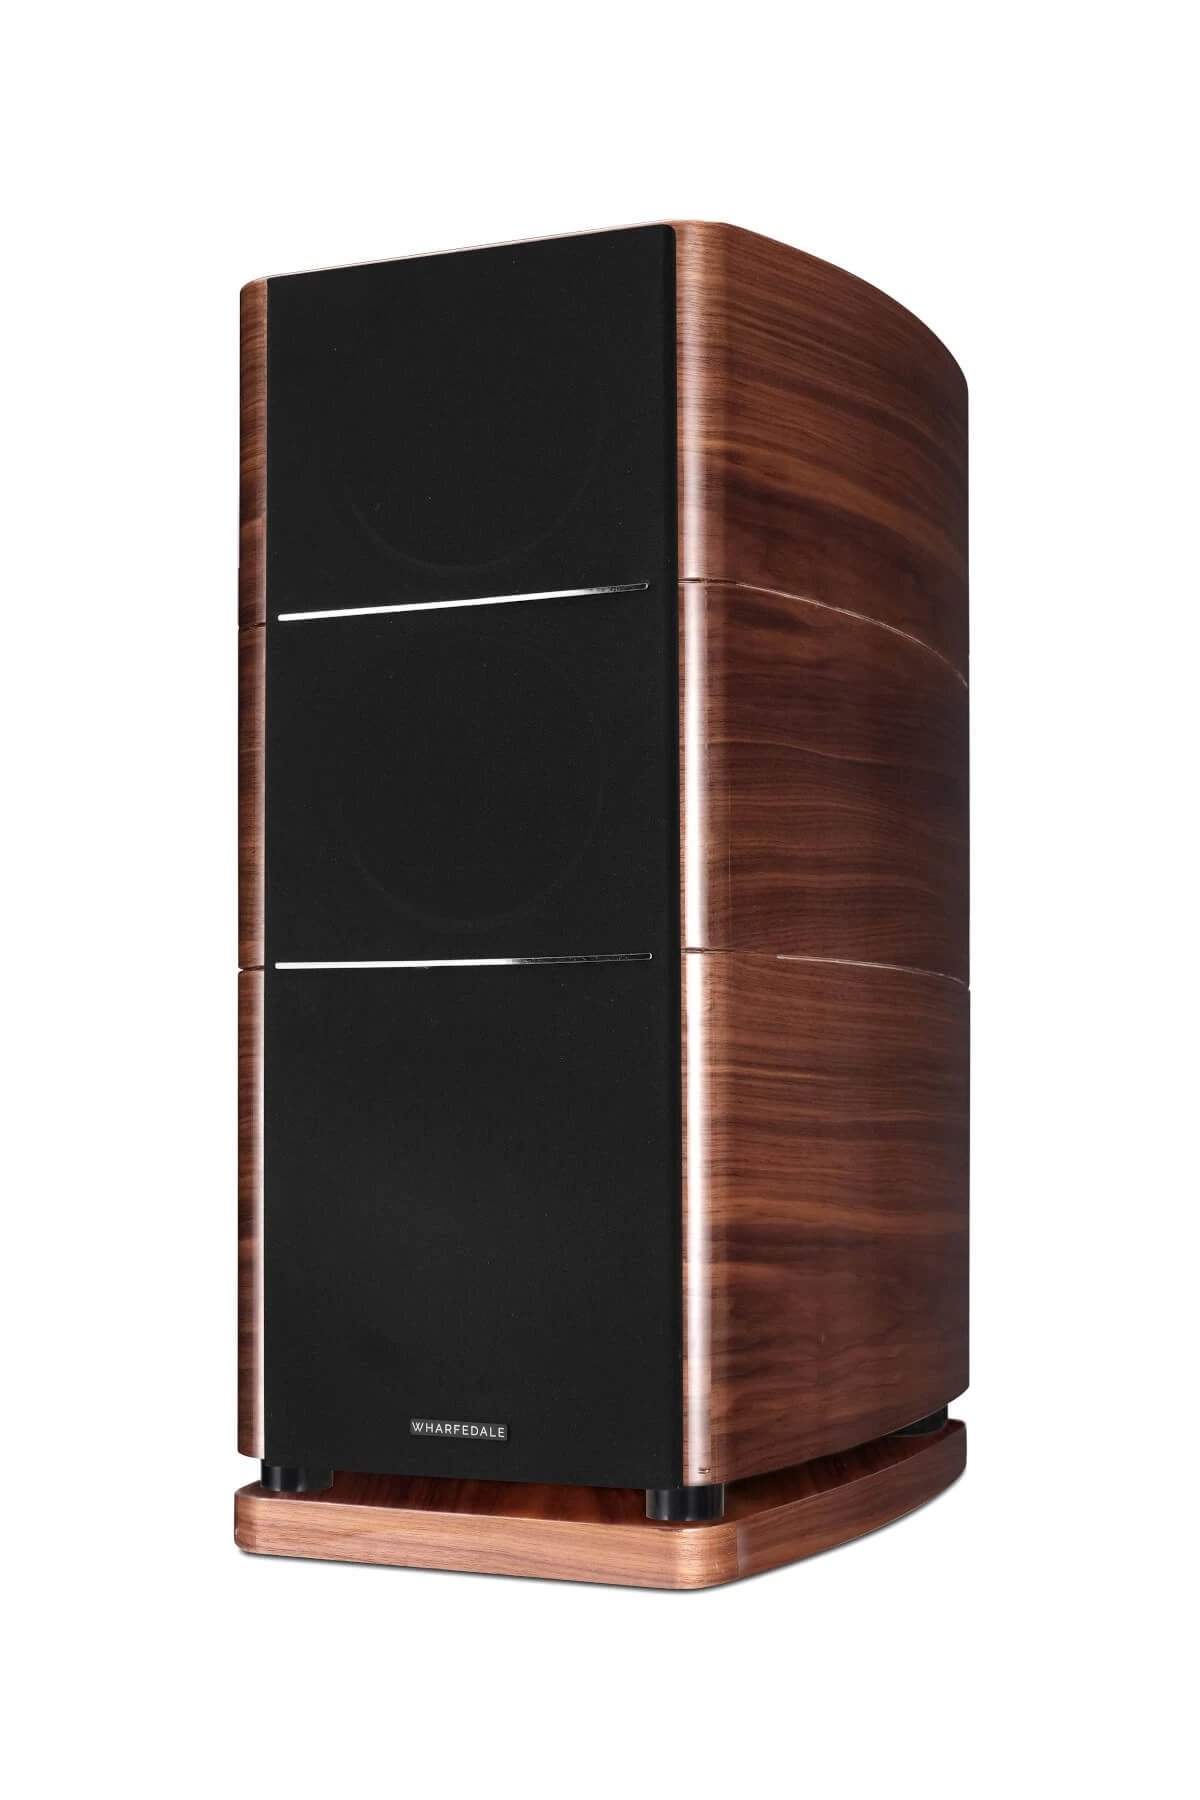 Wharfedale-Elysian-2-front-walnut-with-grill